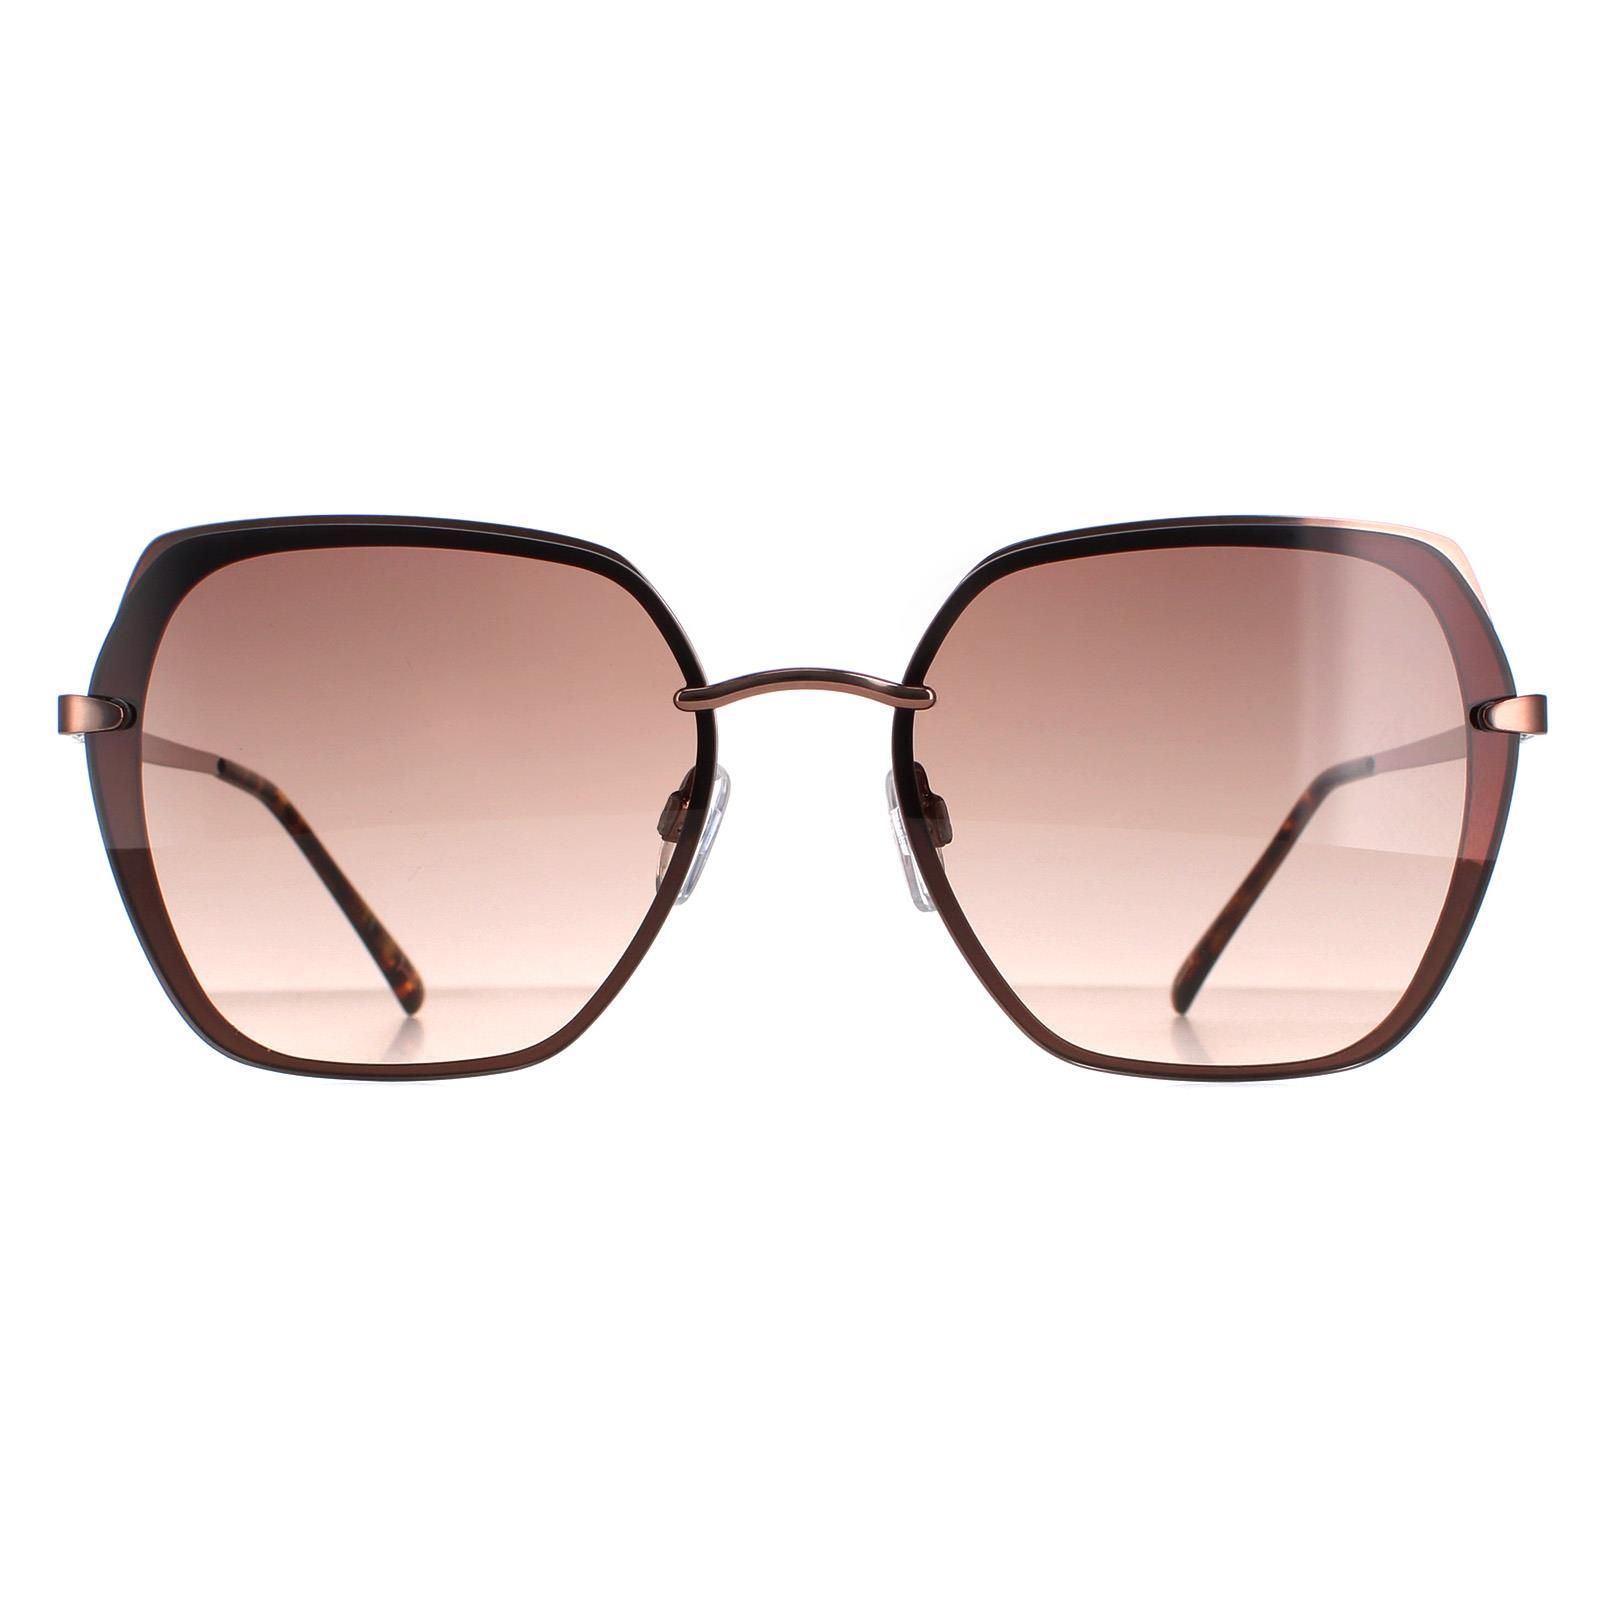 Ted Baker Sunglasses TB1657 Noa 404 Shiny Rose Gold Brown Gradient are a fashionable butterfly style crafted from lightweight metal. The temples feature the Ted Baker branding for authenticity. These sunglasses are perfect for any occasion, whether it be a day out or a formal event. With its timeless style and superior construction, the TB1657 Noa sunglasses are sure to be a favourite for years to come.